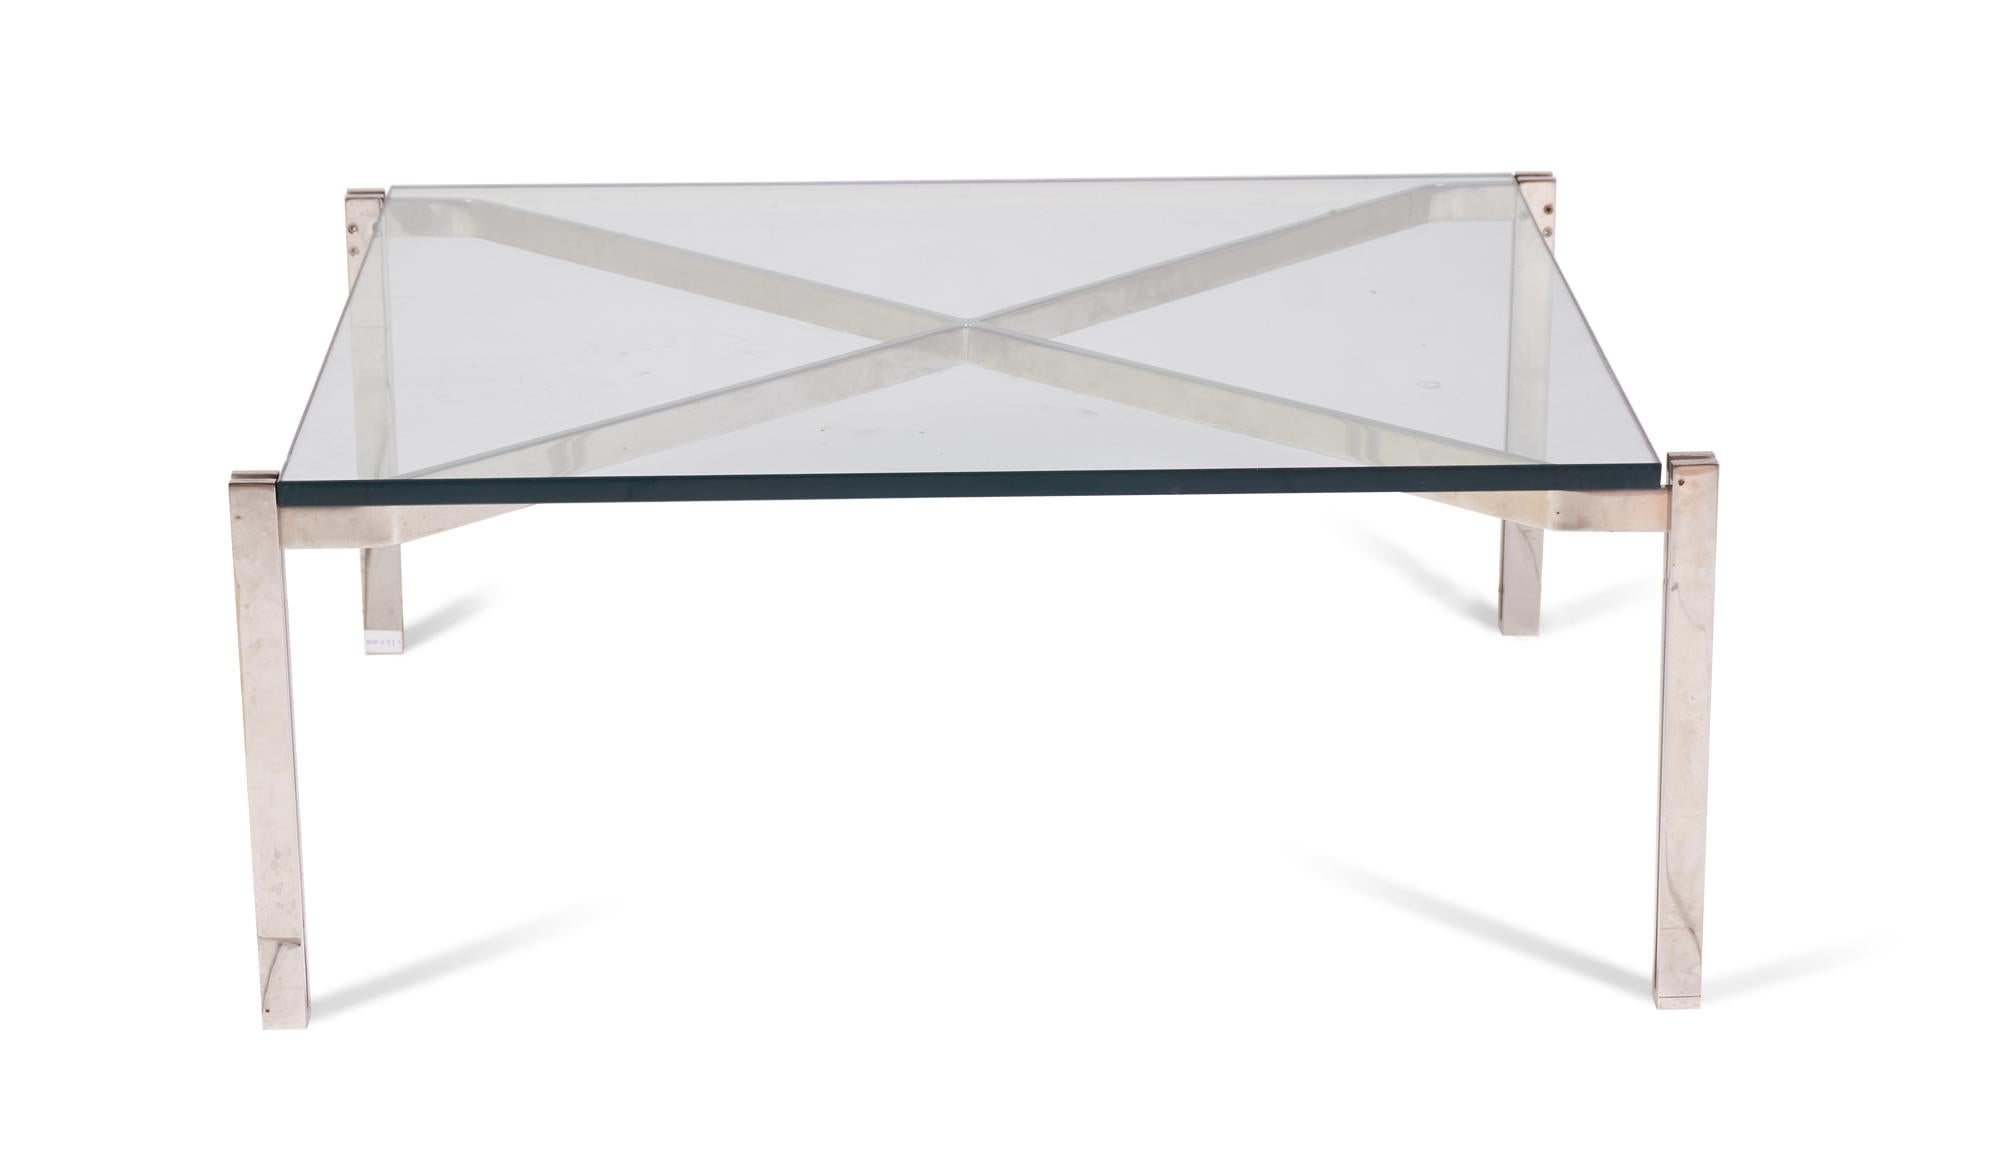 Italian Modernist 'X' Frame Steel and Glass Coffee Table 'Manner of B&B Italia' For Sale 2